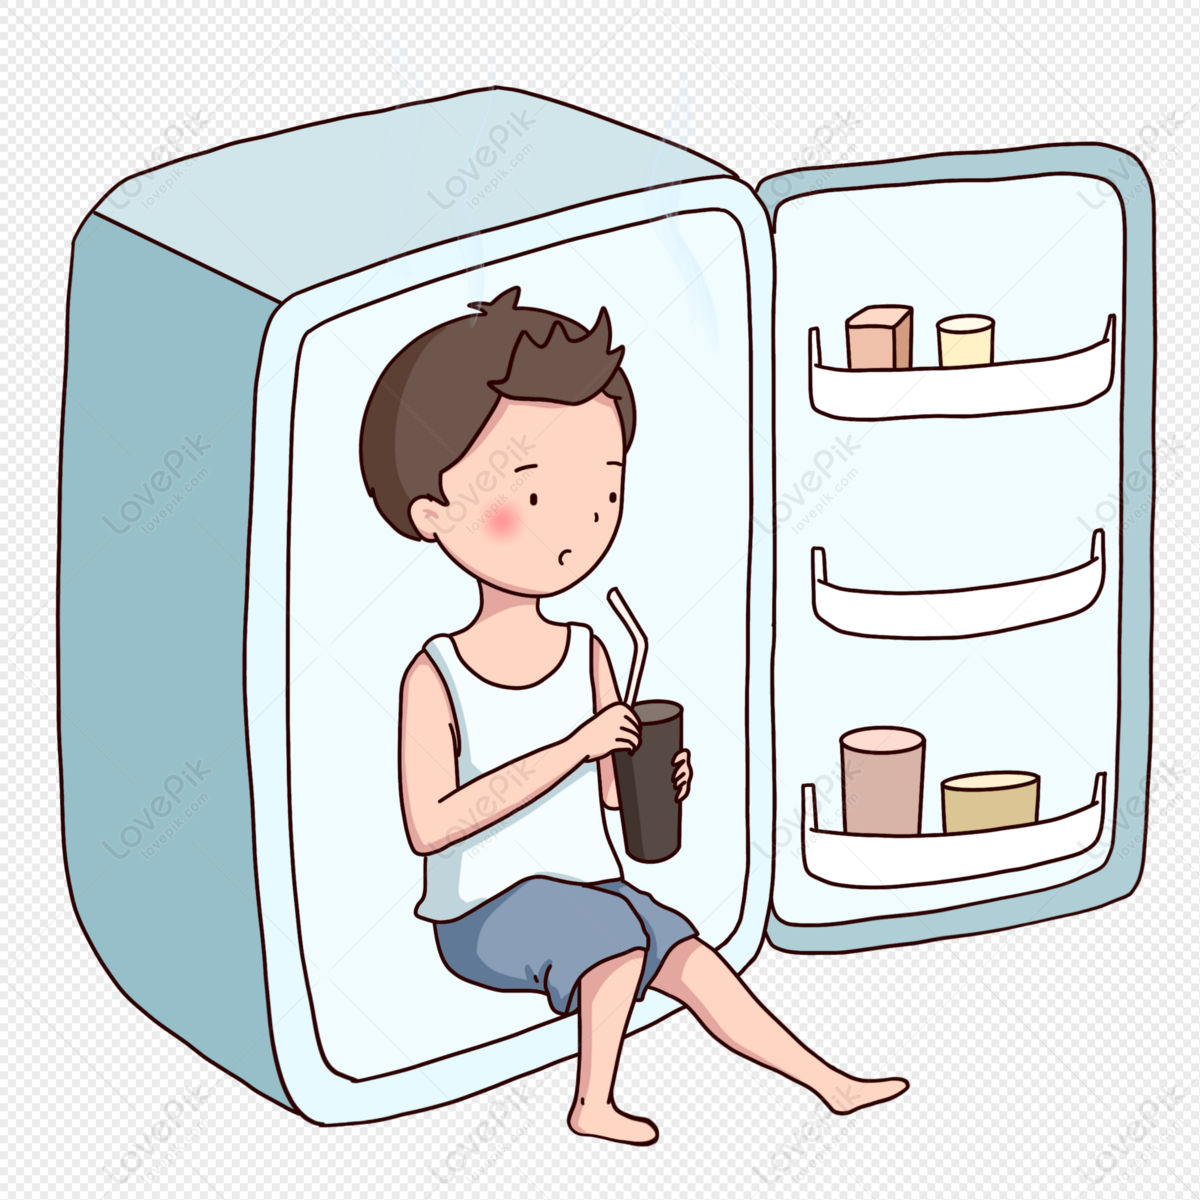 Cartoon Boy Taking A Cool Fridge Free PNG And Clipart Image For Free  Download - Lovepik | 401480379